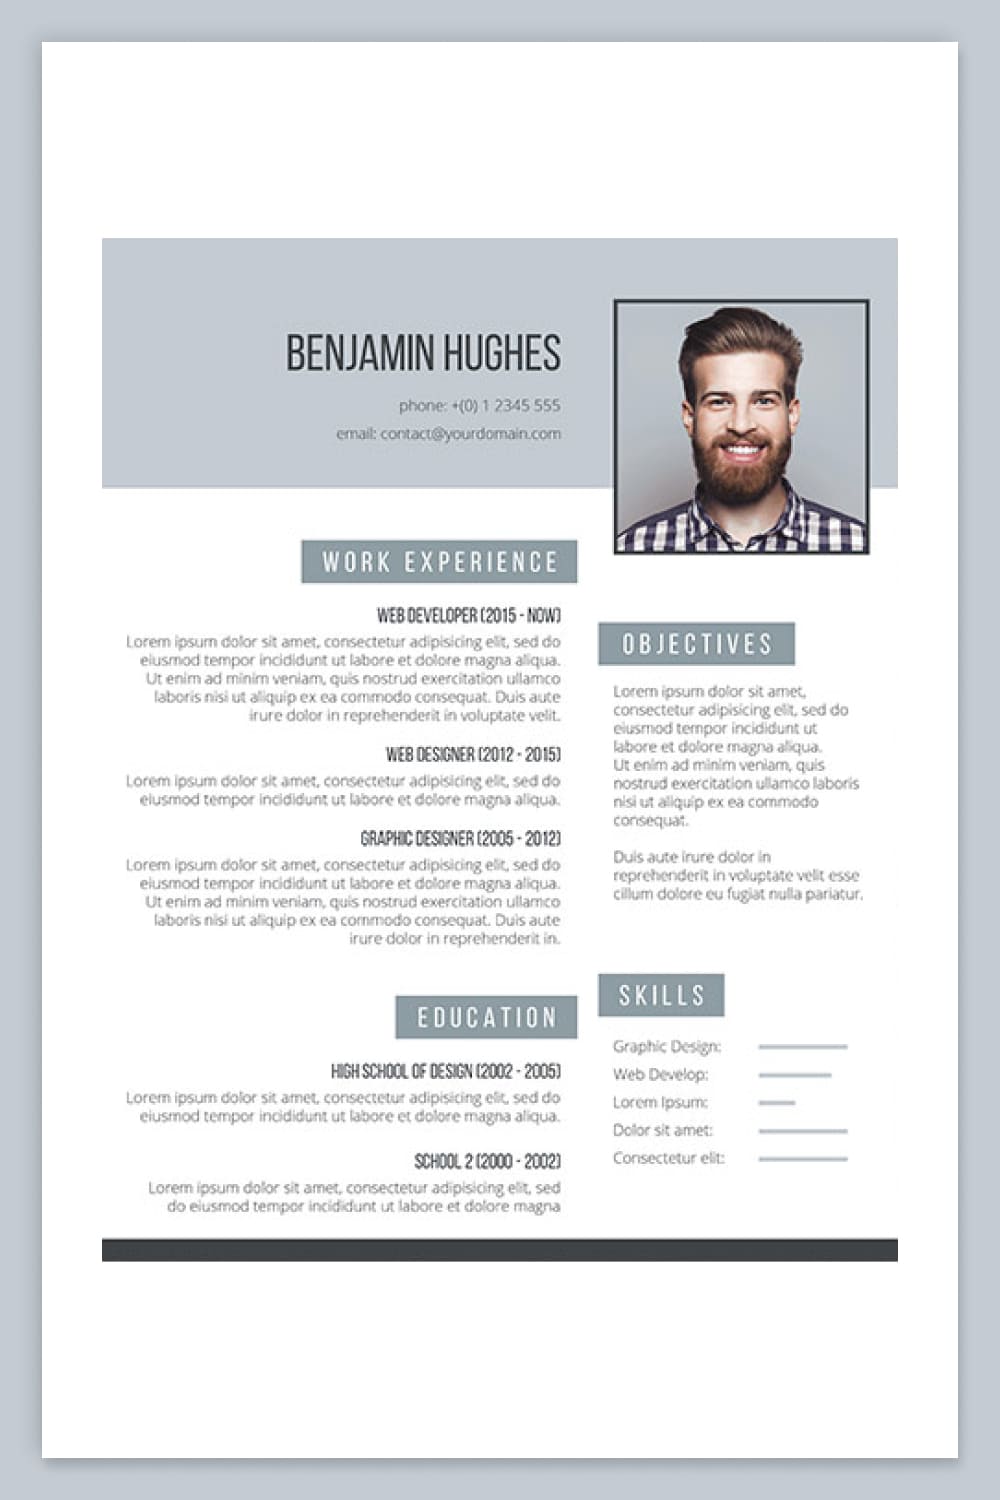 Resume with two columns, gray color scheme and photo.